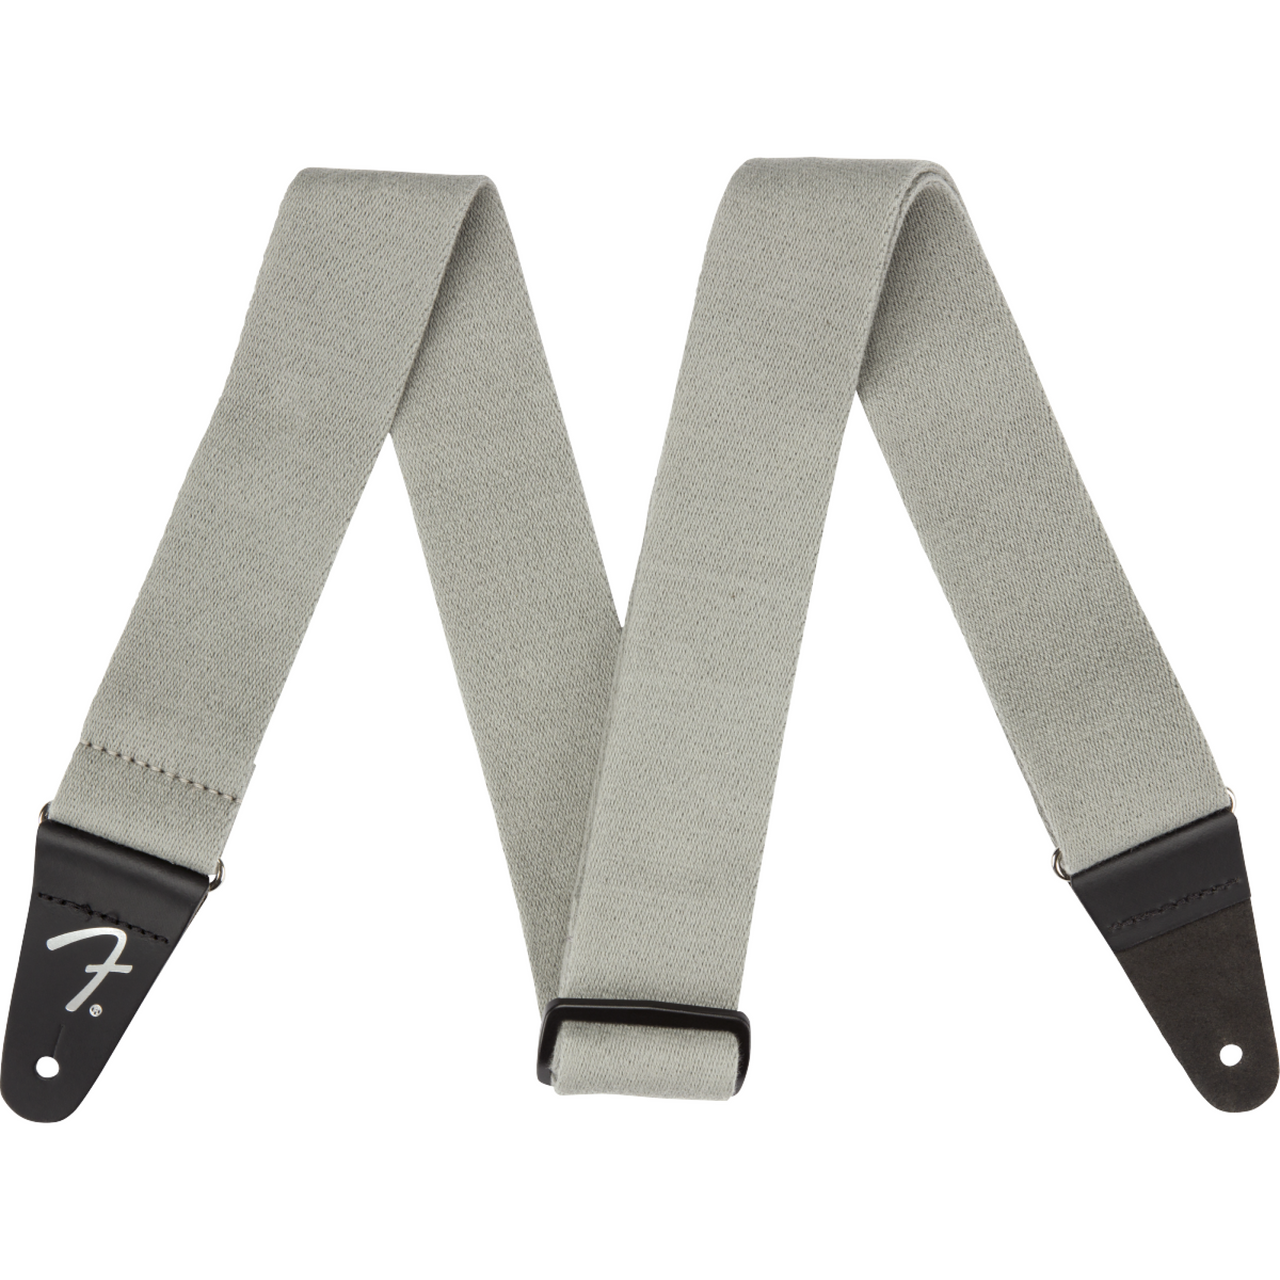 Thaly Fender Supersoft Strap Grey 2", 0990642043